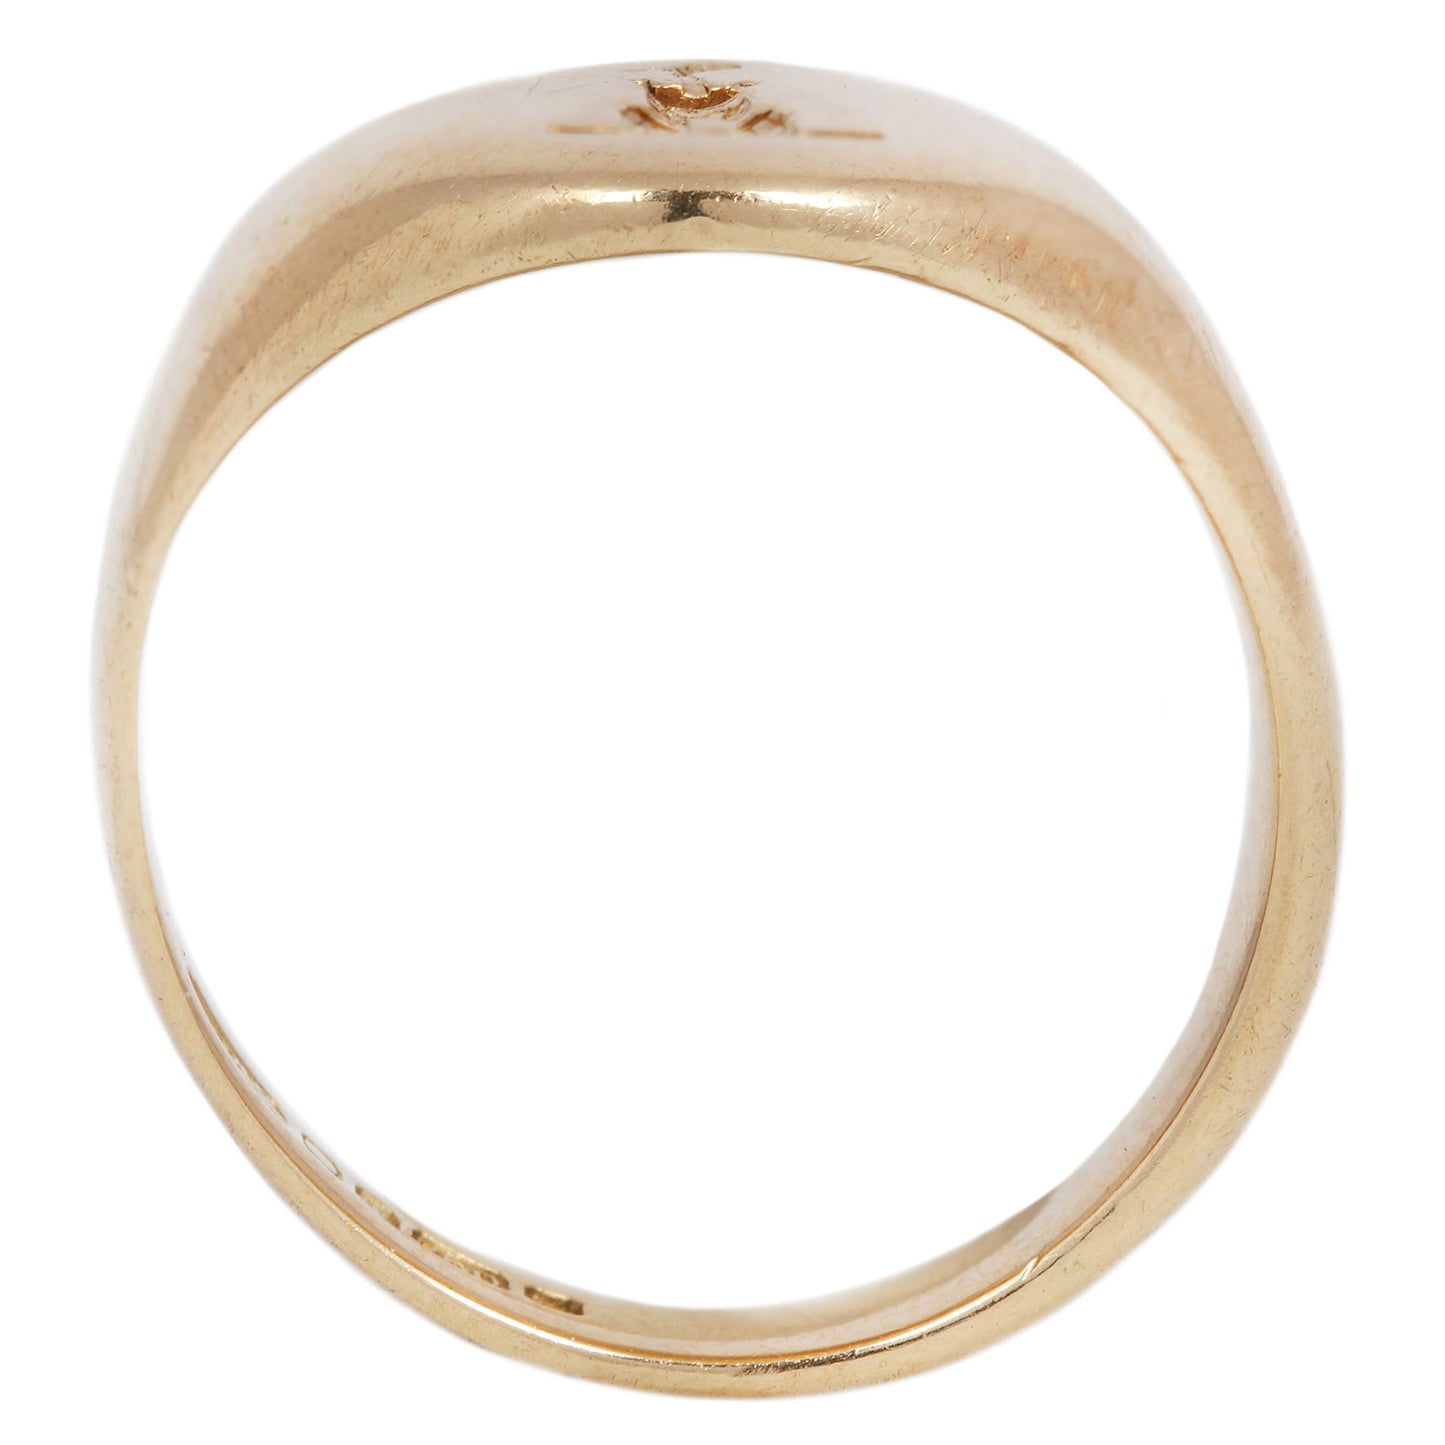 The Lookout Signet Ring